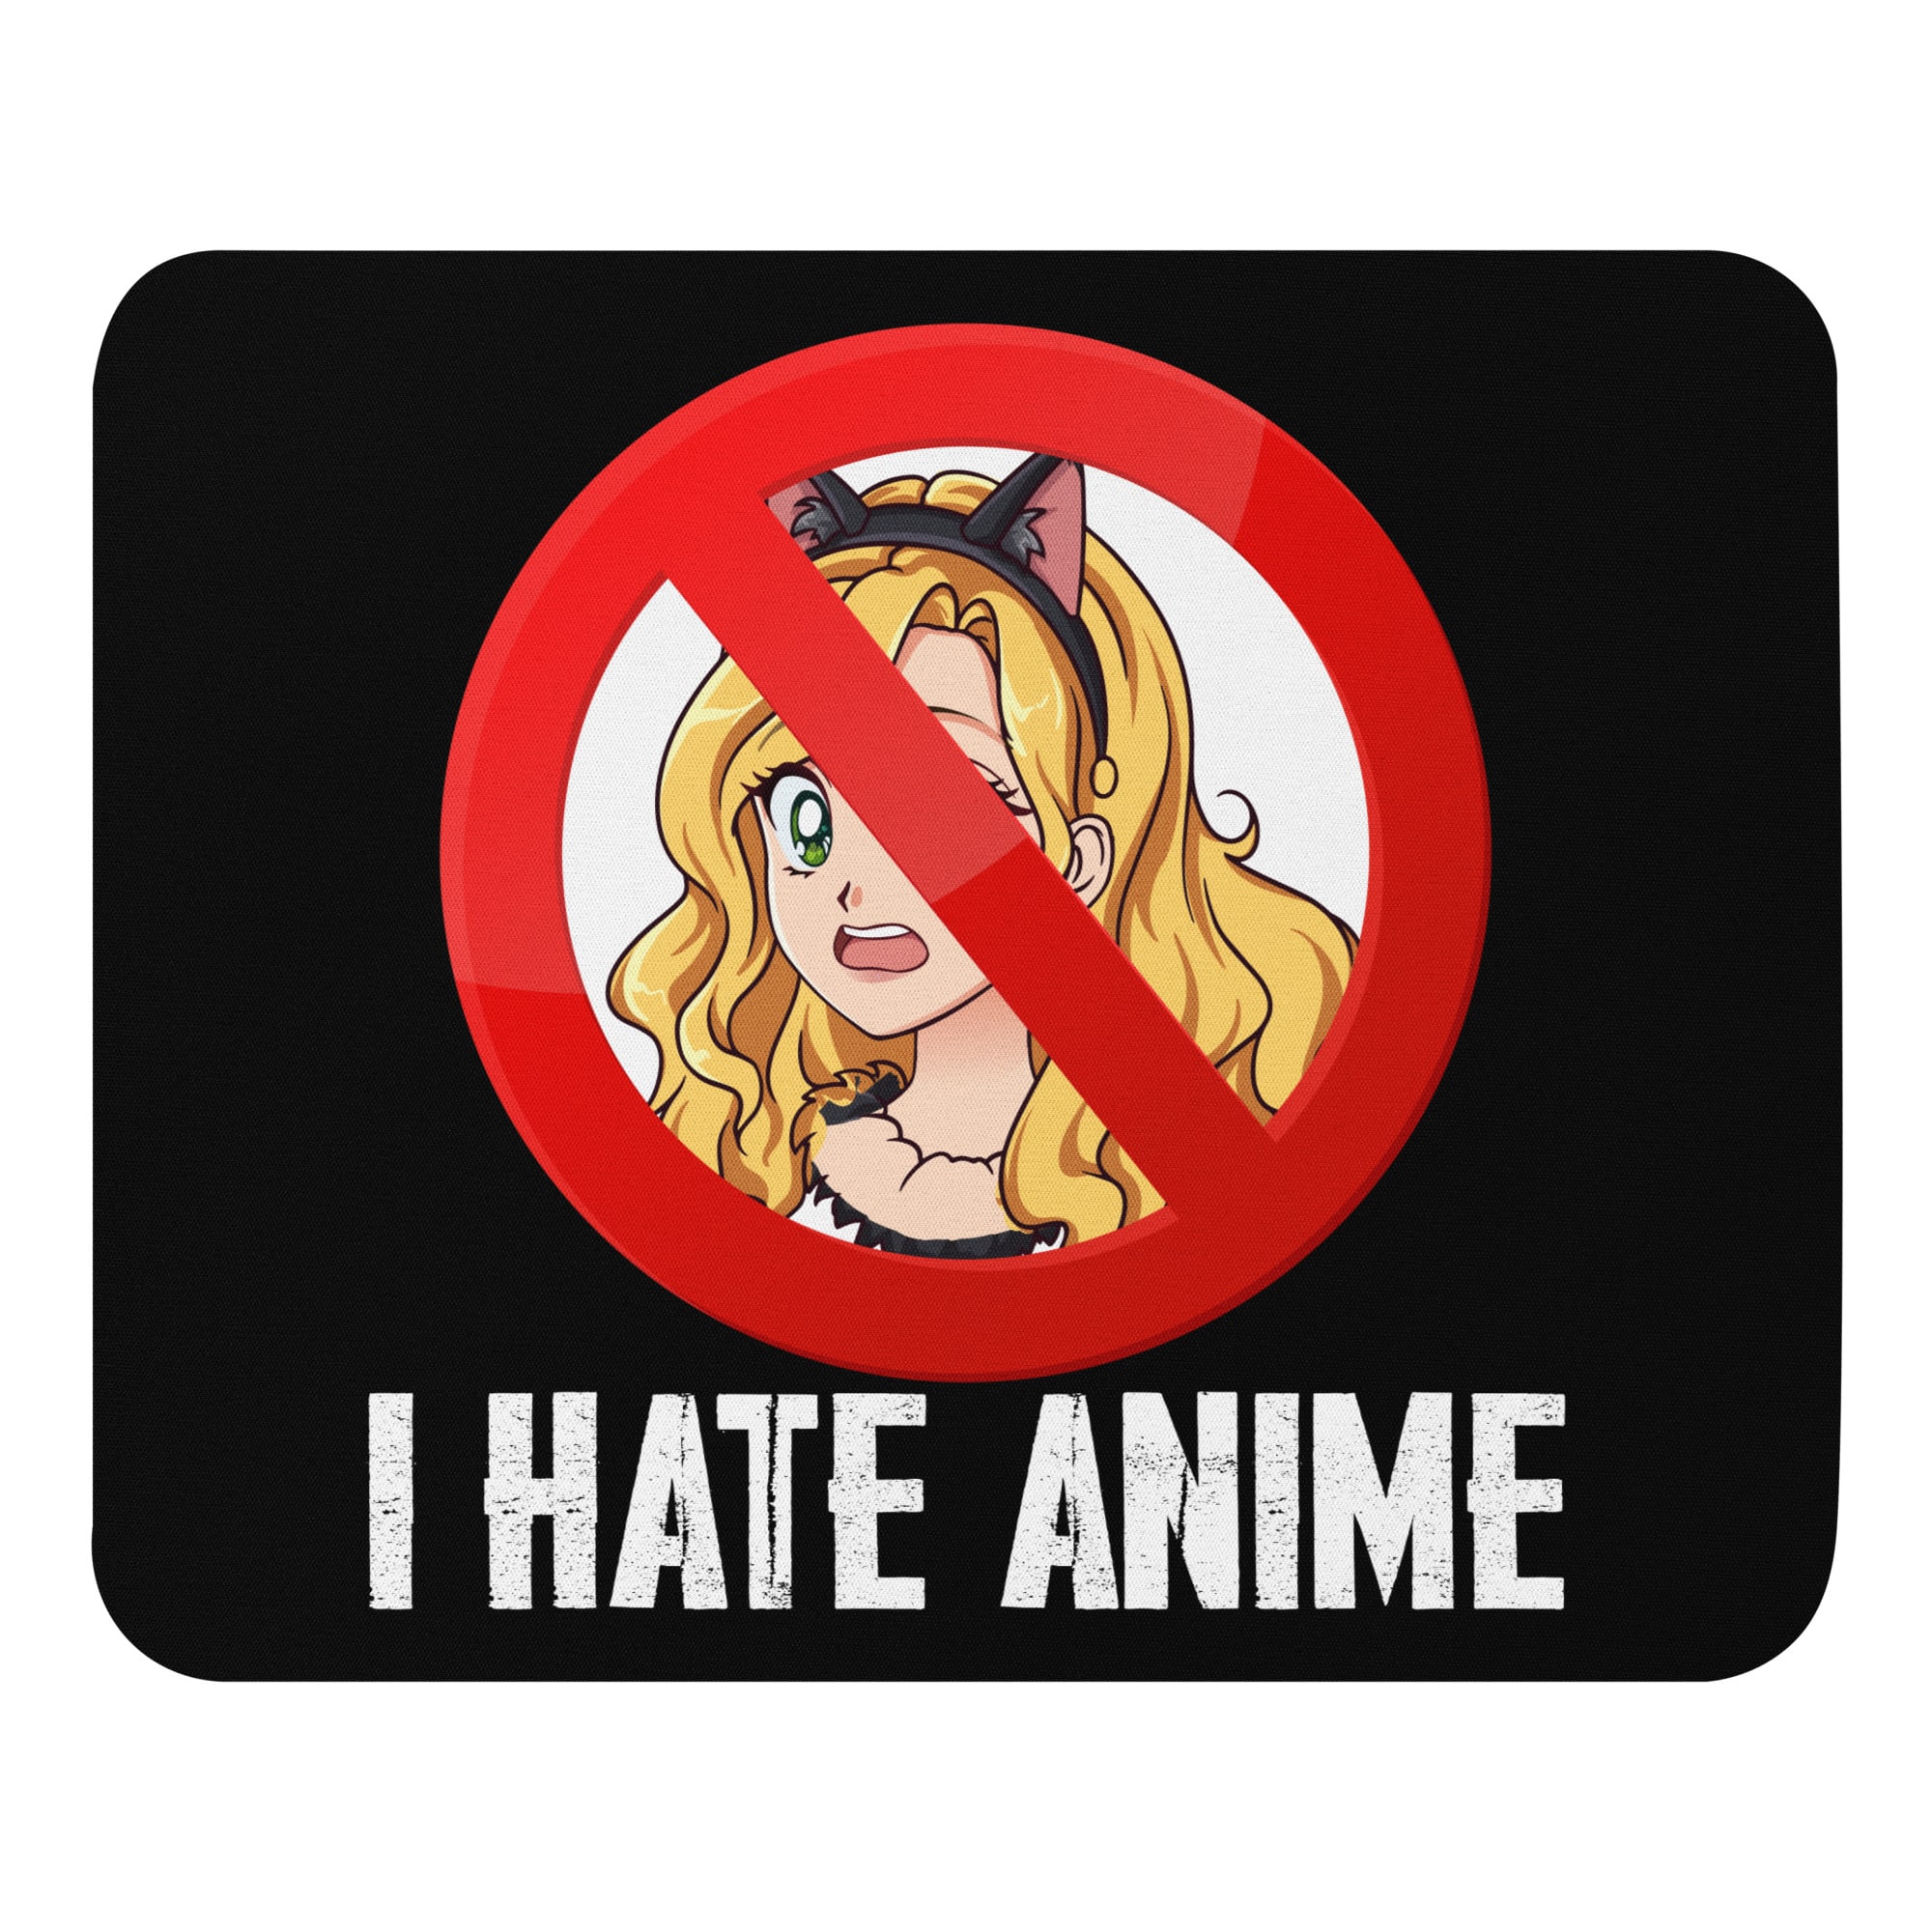 I Hate Anime Mouse Pad Anti-anime mouse pad Anime-hating mouse pad Anime criticism mouse pad Anti-otaku mouse pad Dislike anime mouse pad Non-anime mouse pad Anime-free mouse pad Anti-weeb mouse pad Anime-opposing mouse pad Not into anime mouse pad Video game store Gaming merchandise Gaming accessories shop Online gaming store Video game shop near me Gaming console store PC gaming store Gaming gear shop Retro gaming shop Board game shop Anime merchandise Anime store online Japanese anime shop Anime figurines Manga shop Anime DVDs Anime accessories Anime apparel Anime collectibles Anime gifts